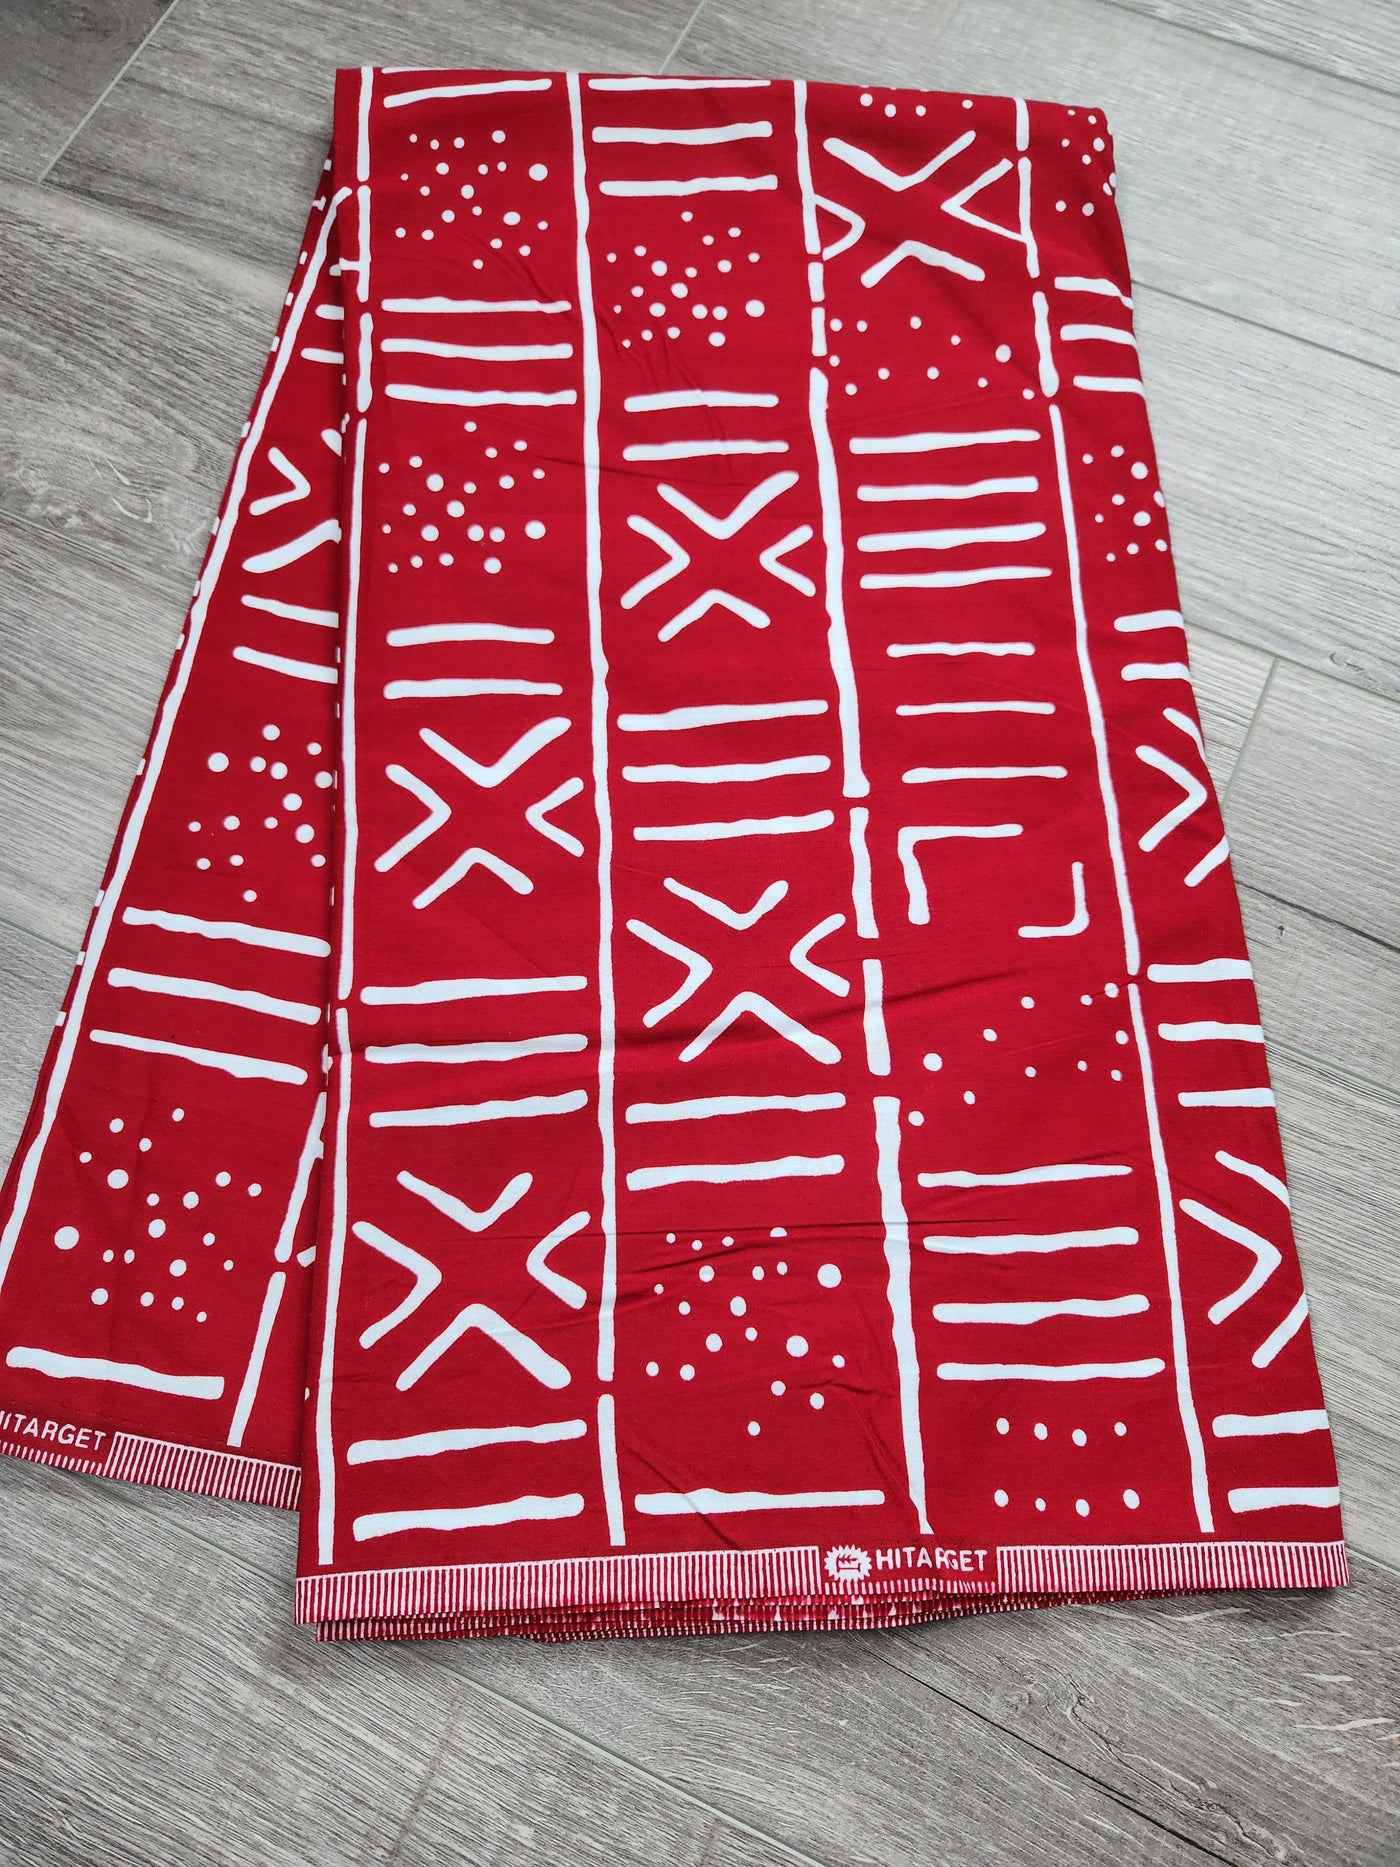 Red and White Tribal African Print Fabric, Ankara Fabric